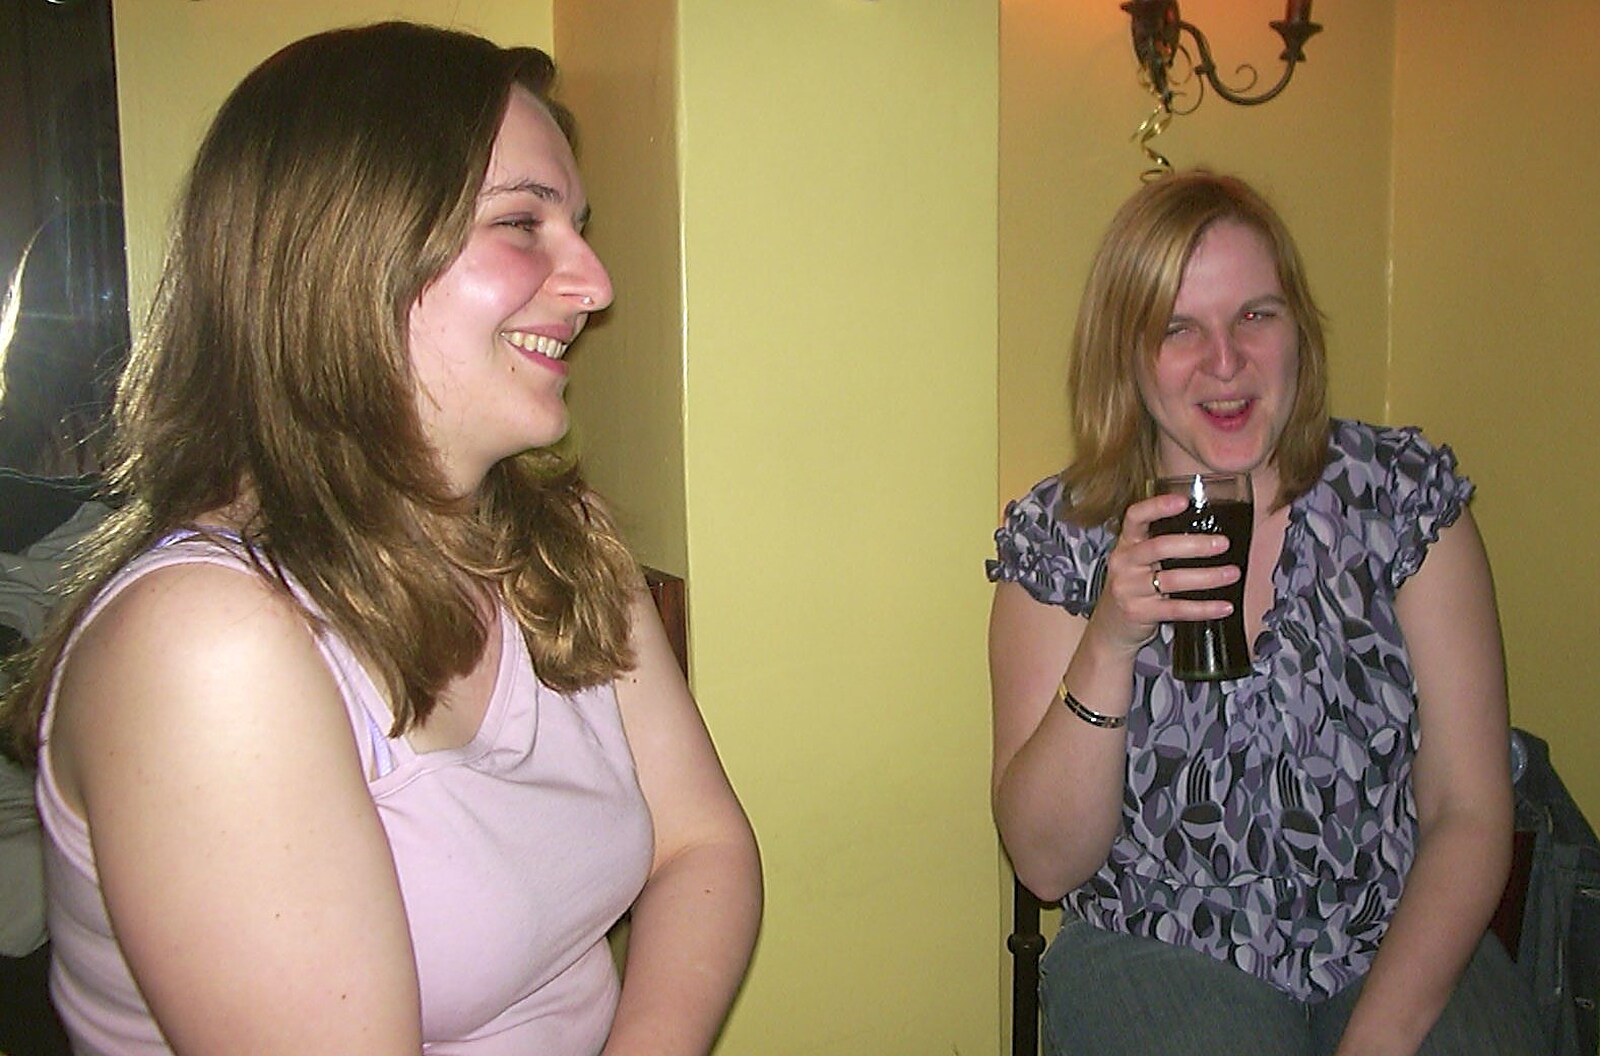 A March Miscellany: The BBs, Pulham Pubs and Broken Cars - Norfolk and Cambridgeshire, 31st March 2004: Jess and Sarah